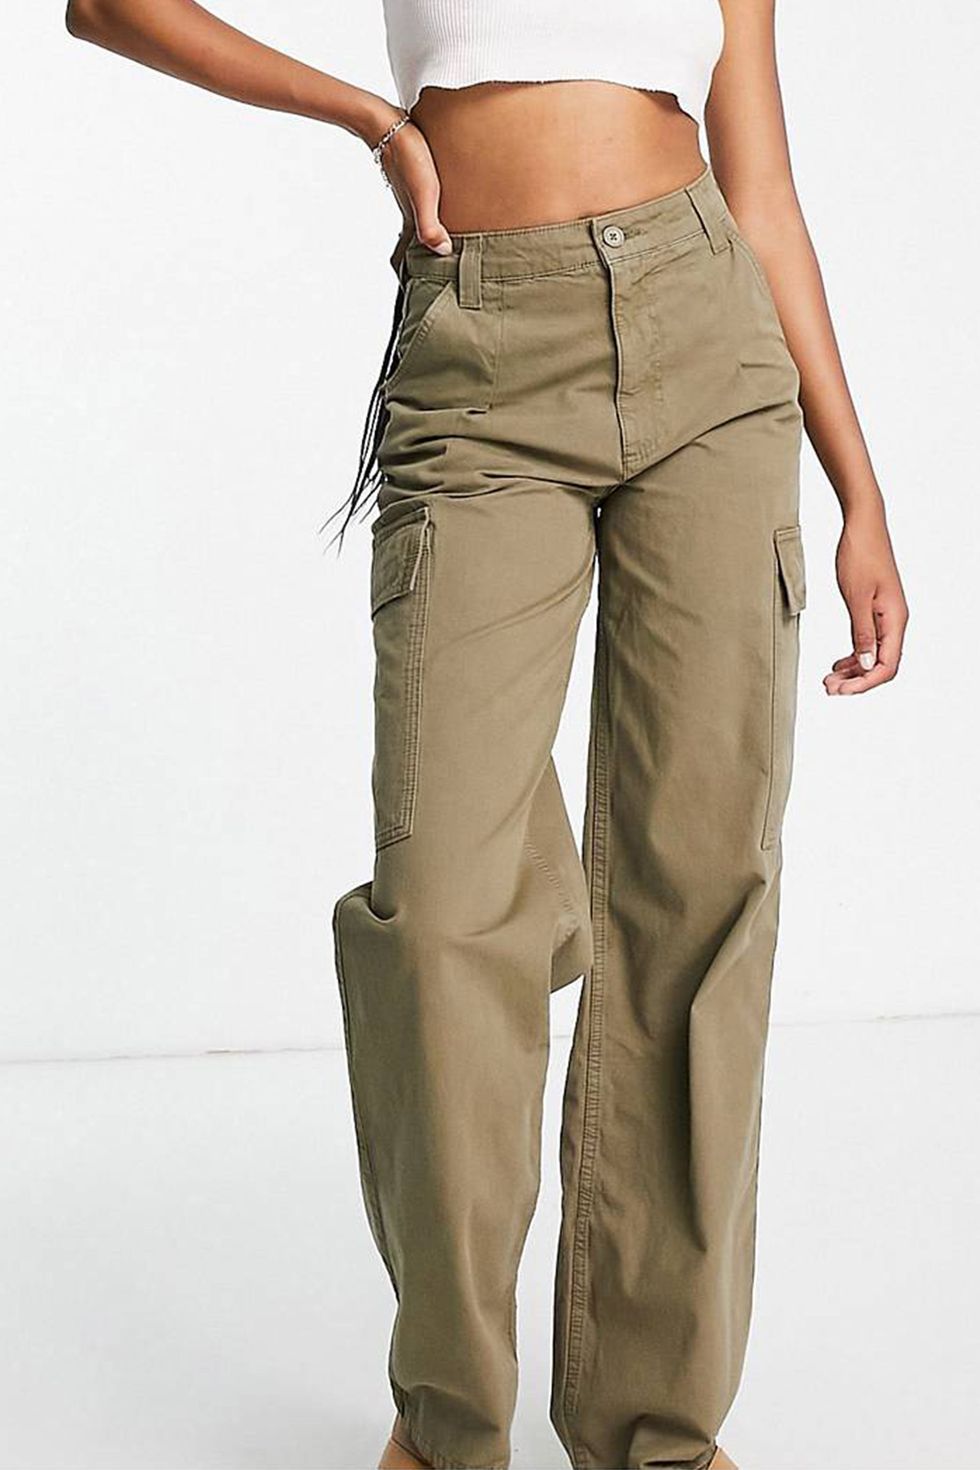 How To Choose the Best Cargo Pants For Women?